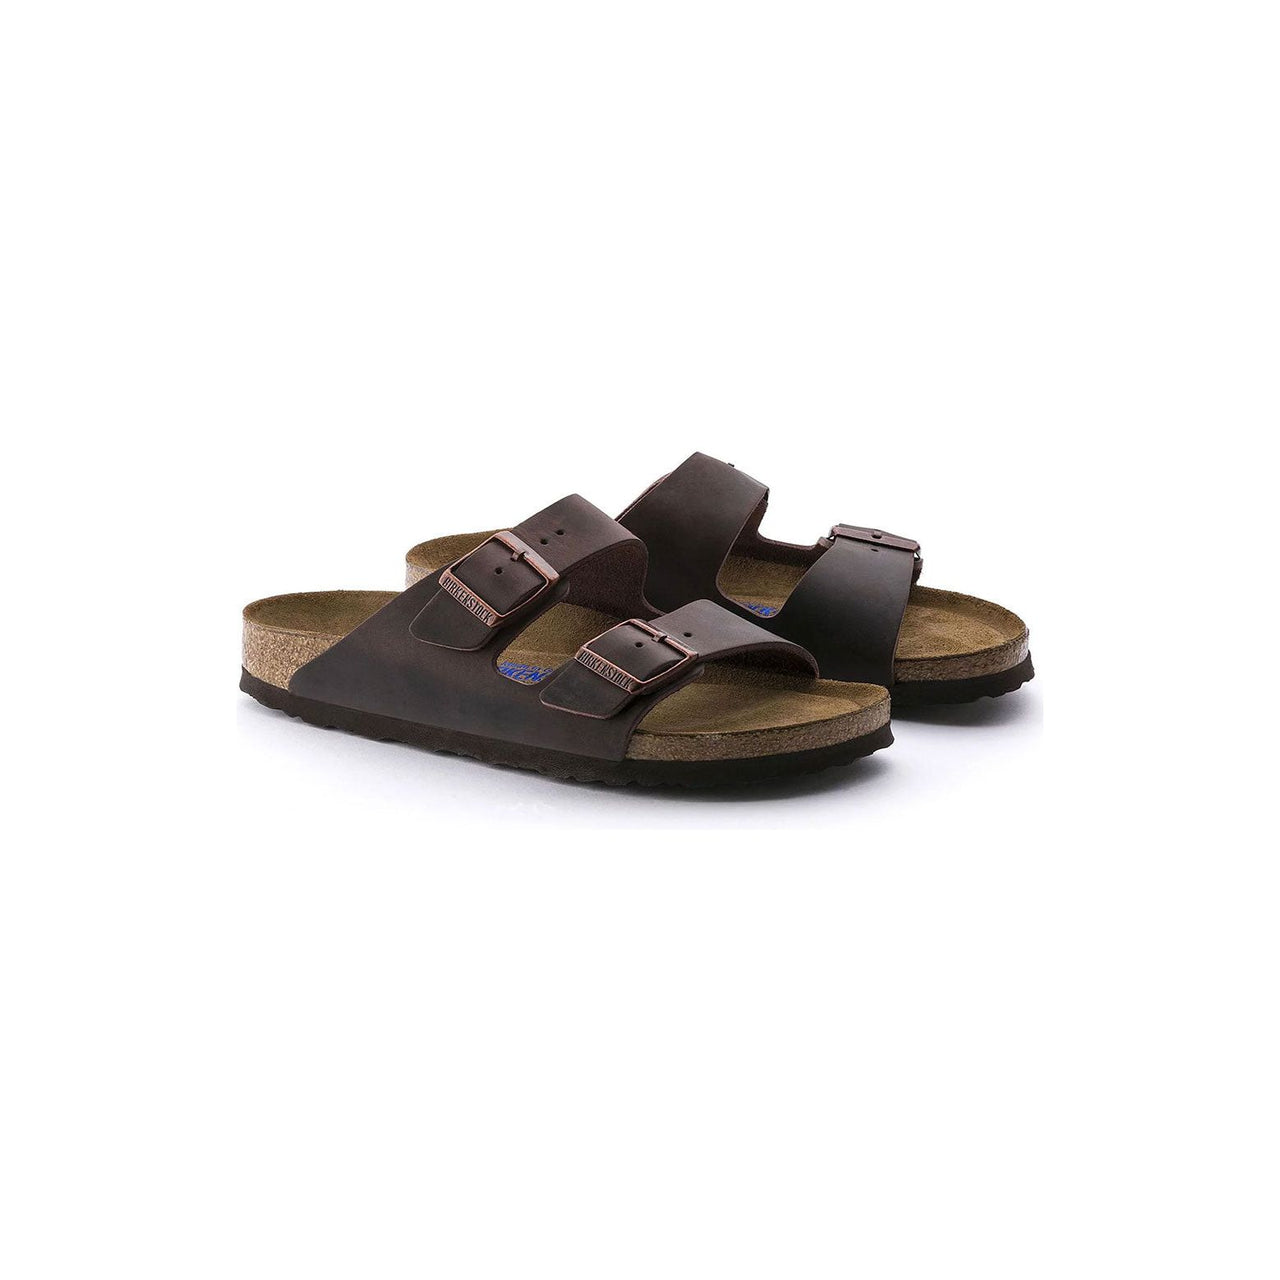 Arizona Soft Footbed Sandals Habana - Front view of brown leather sandals with adjustable straps and cork footbed